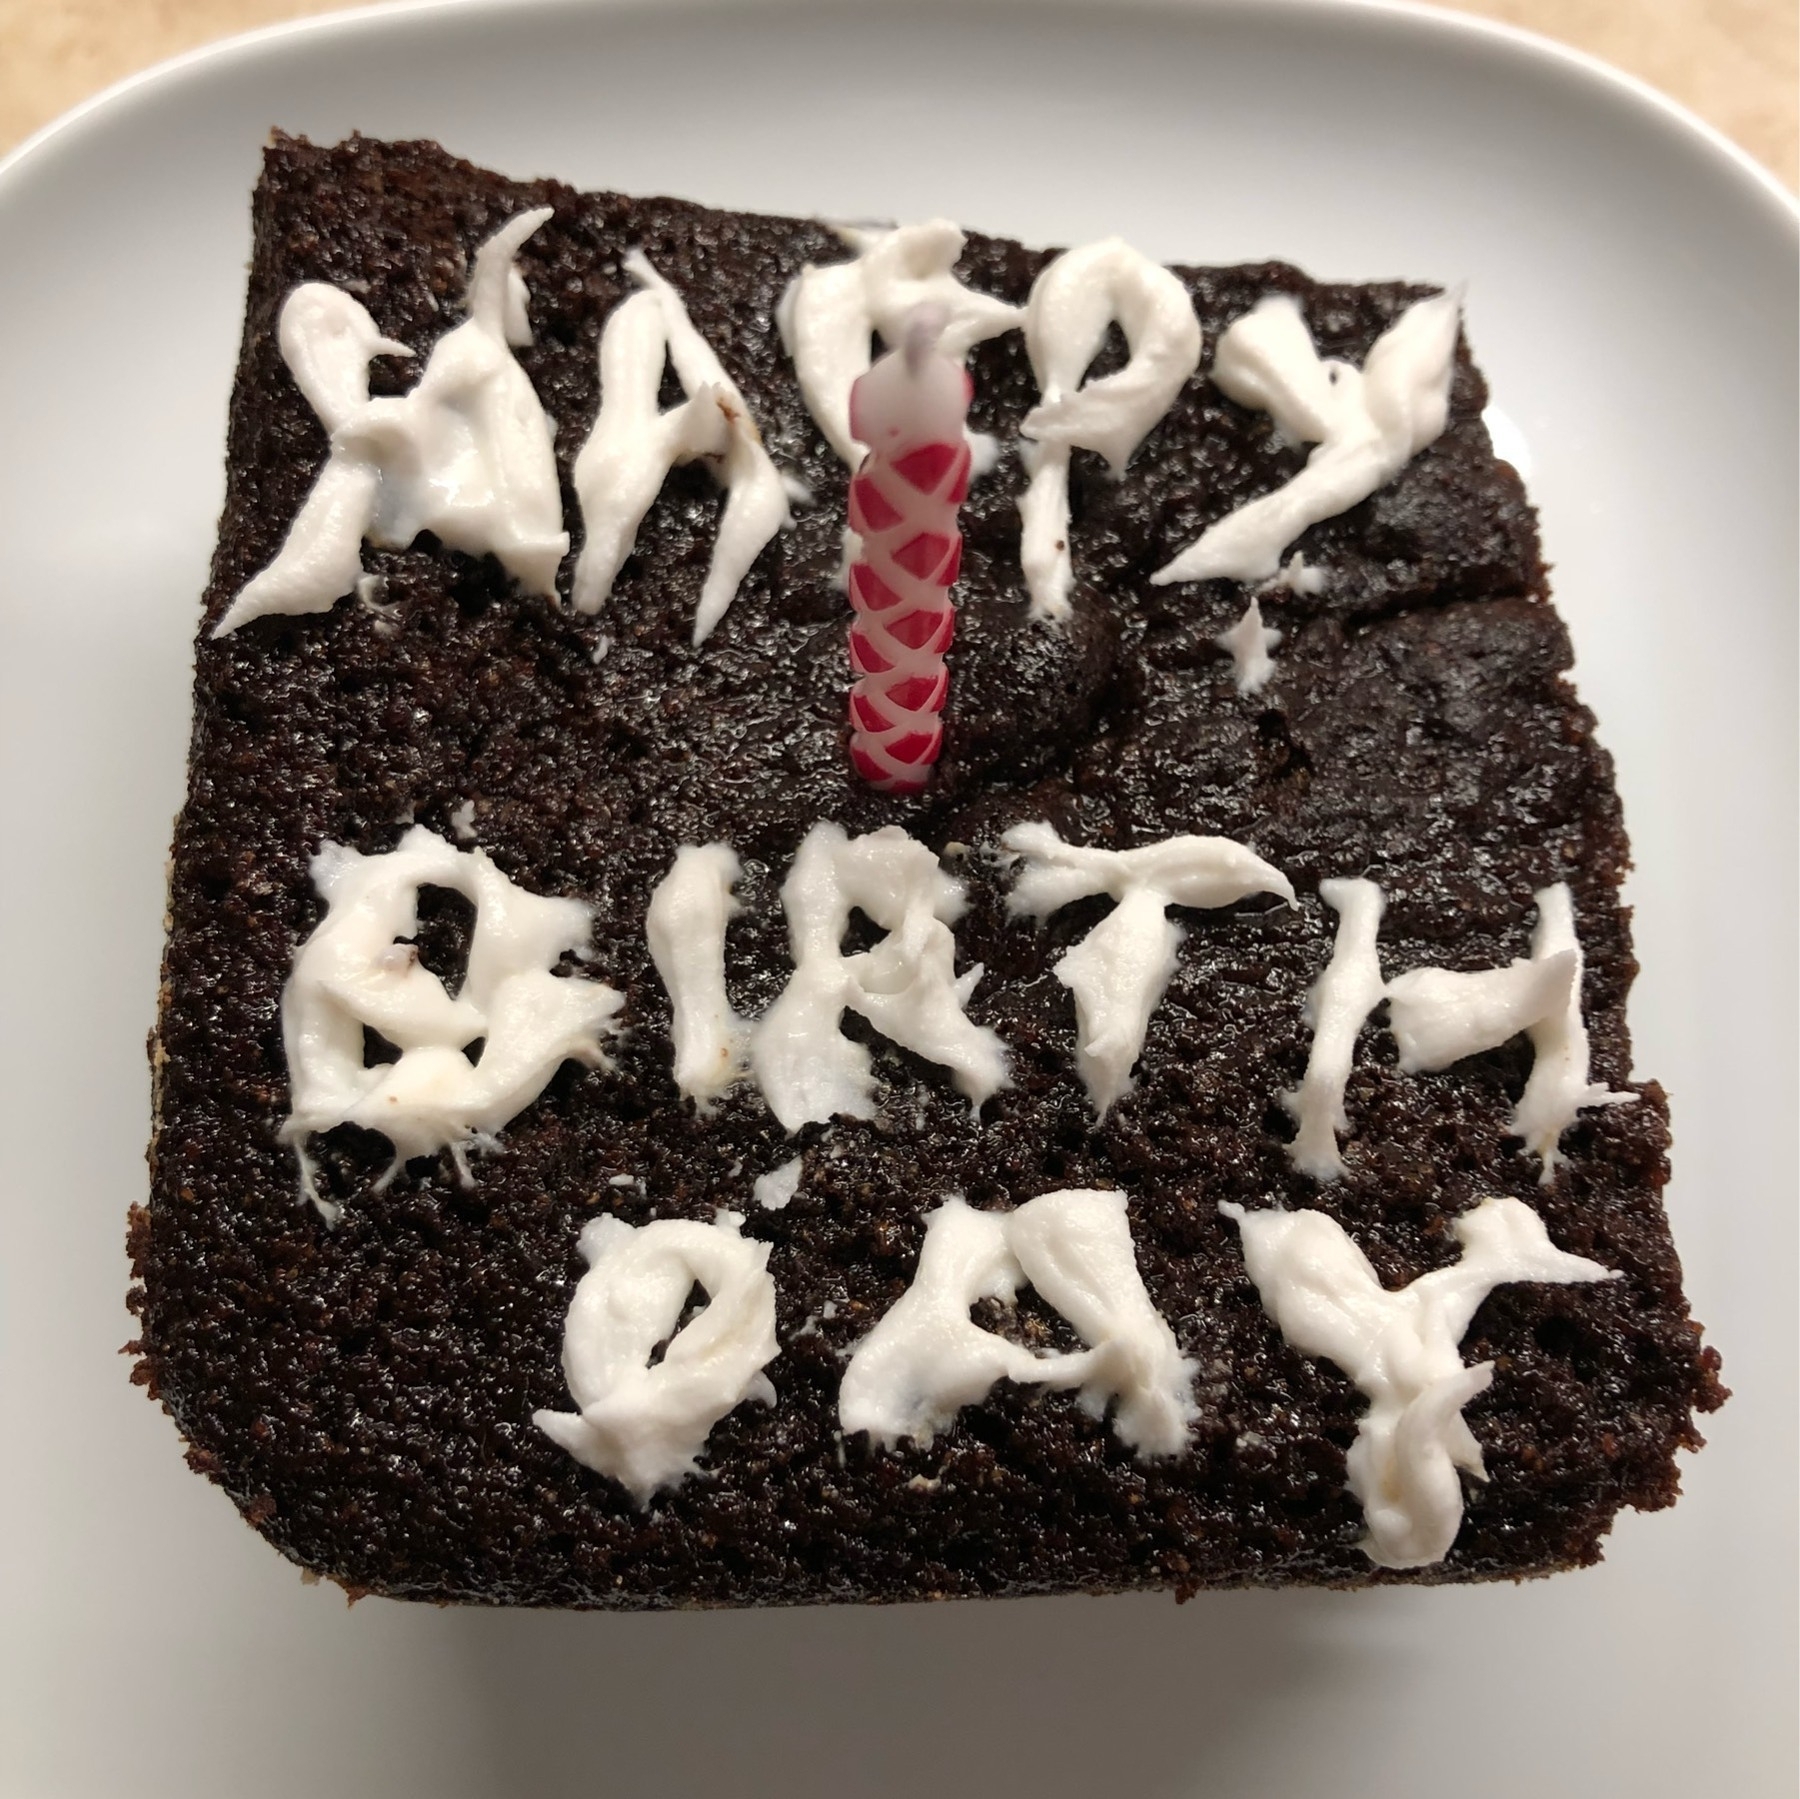 Chocolate brownie with candle and icing spelling out happy birthday.